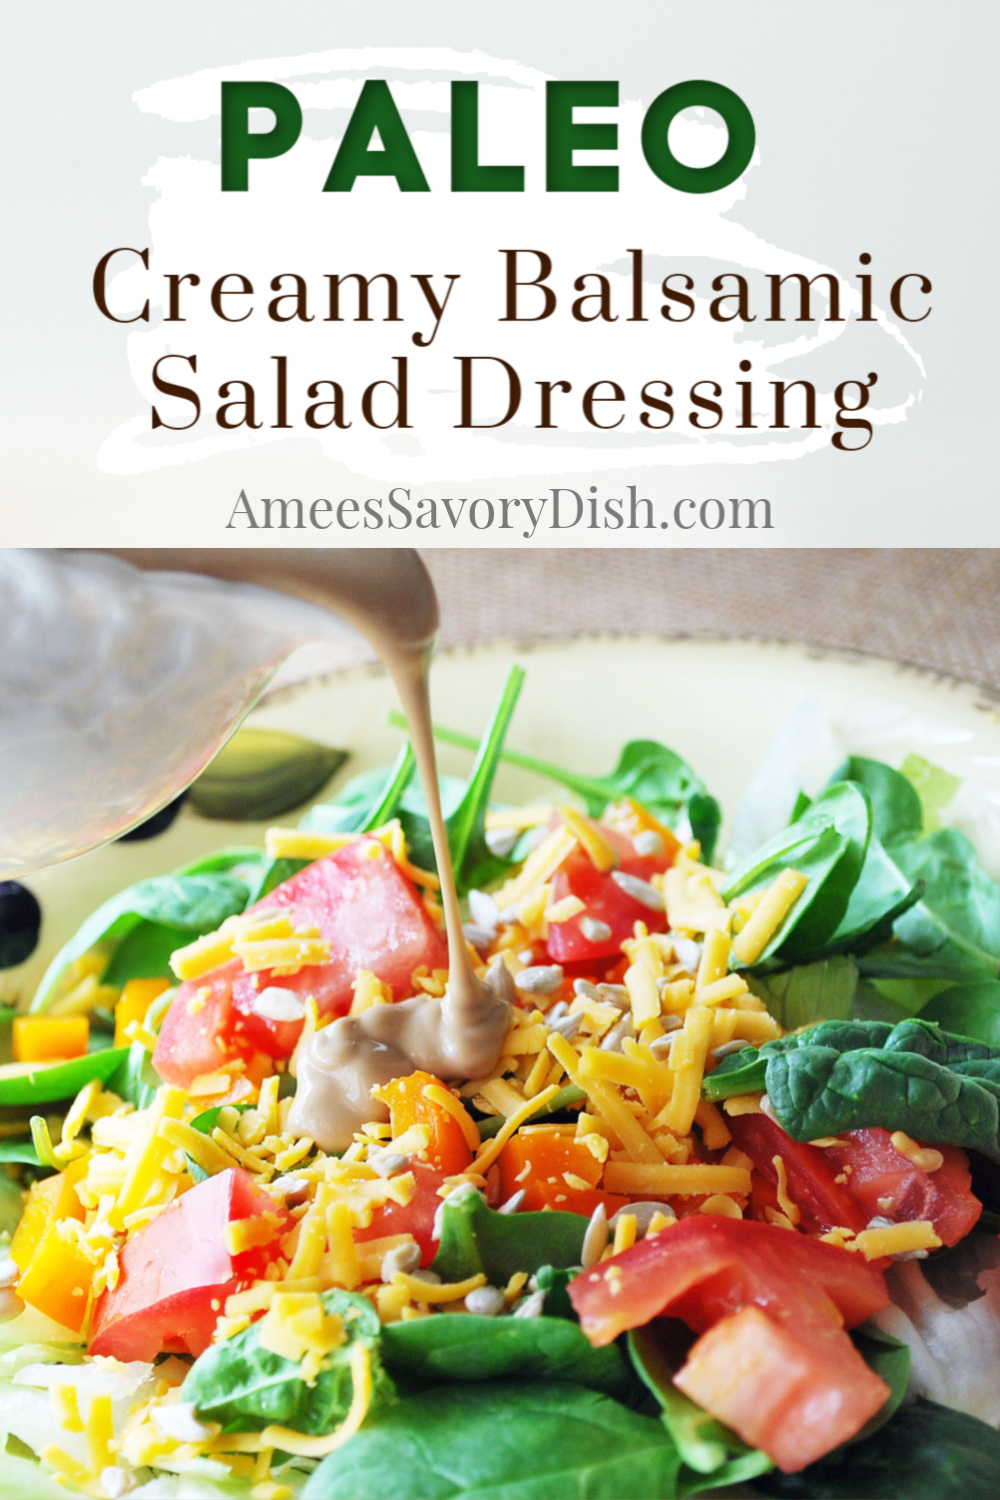 This simple and delicious creamy balsamic Paleo salad dressing is made with Paleo-friendly olive oil mayonnaise, a blend of balsamic and red vinegar and spices. #paleosaladdressing #saladdressing #creamybalsamic #paleorecipe via @Ameessavorydish